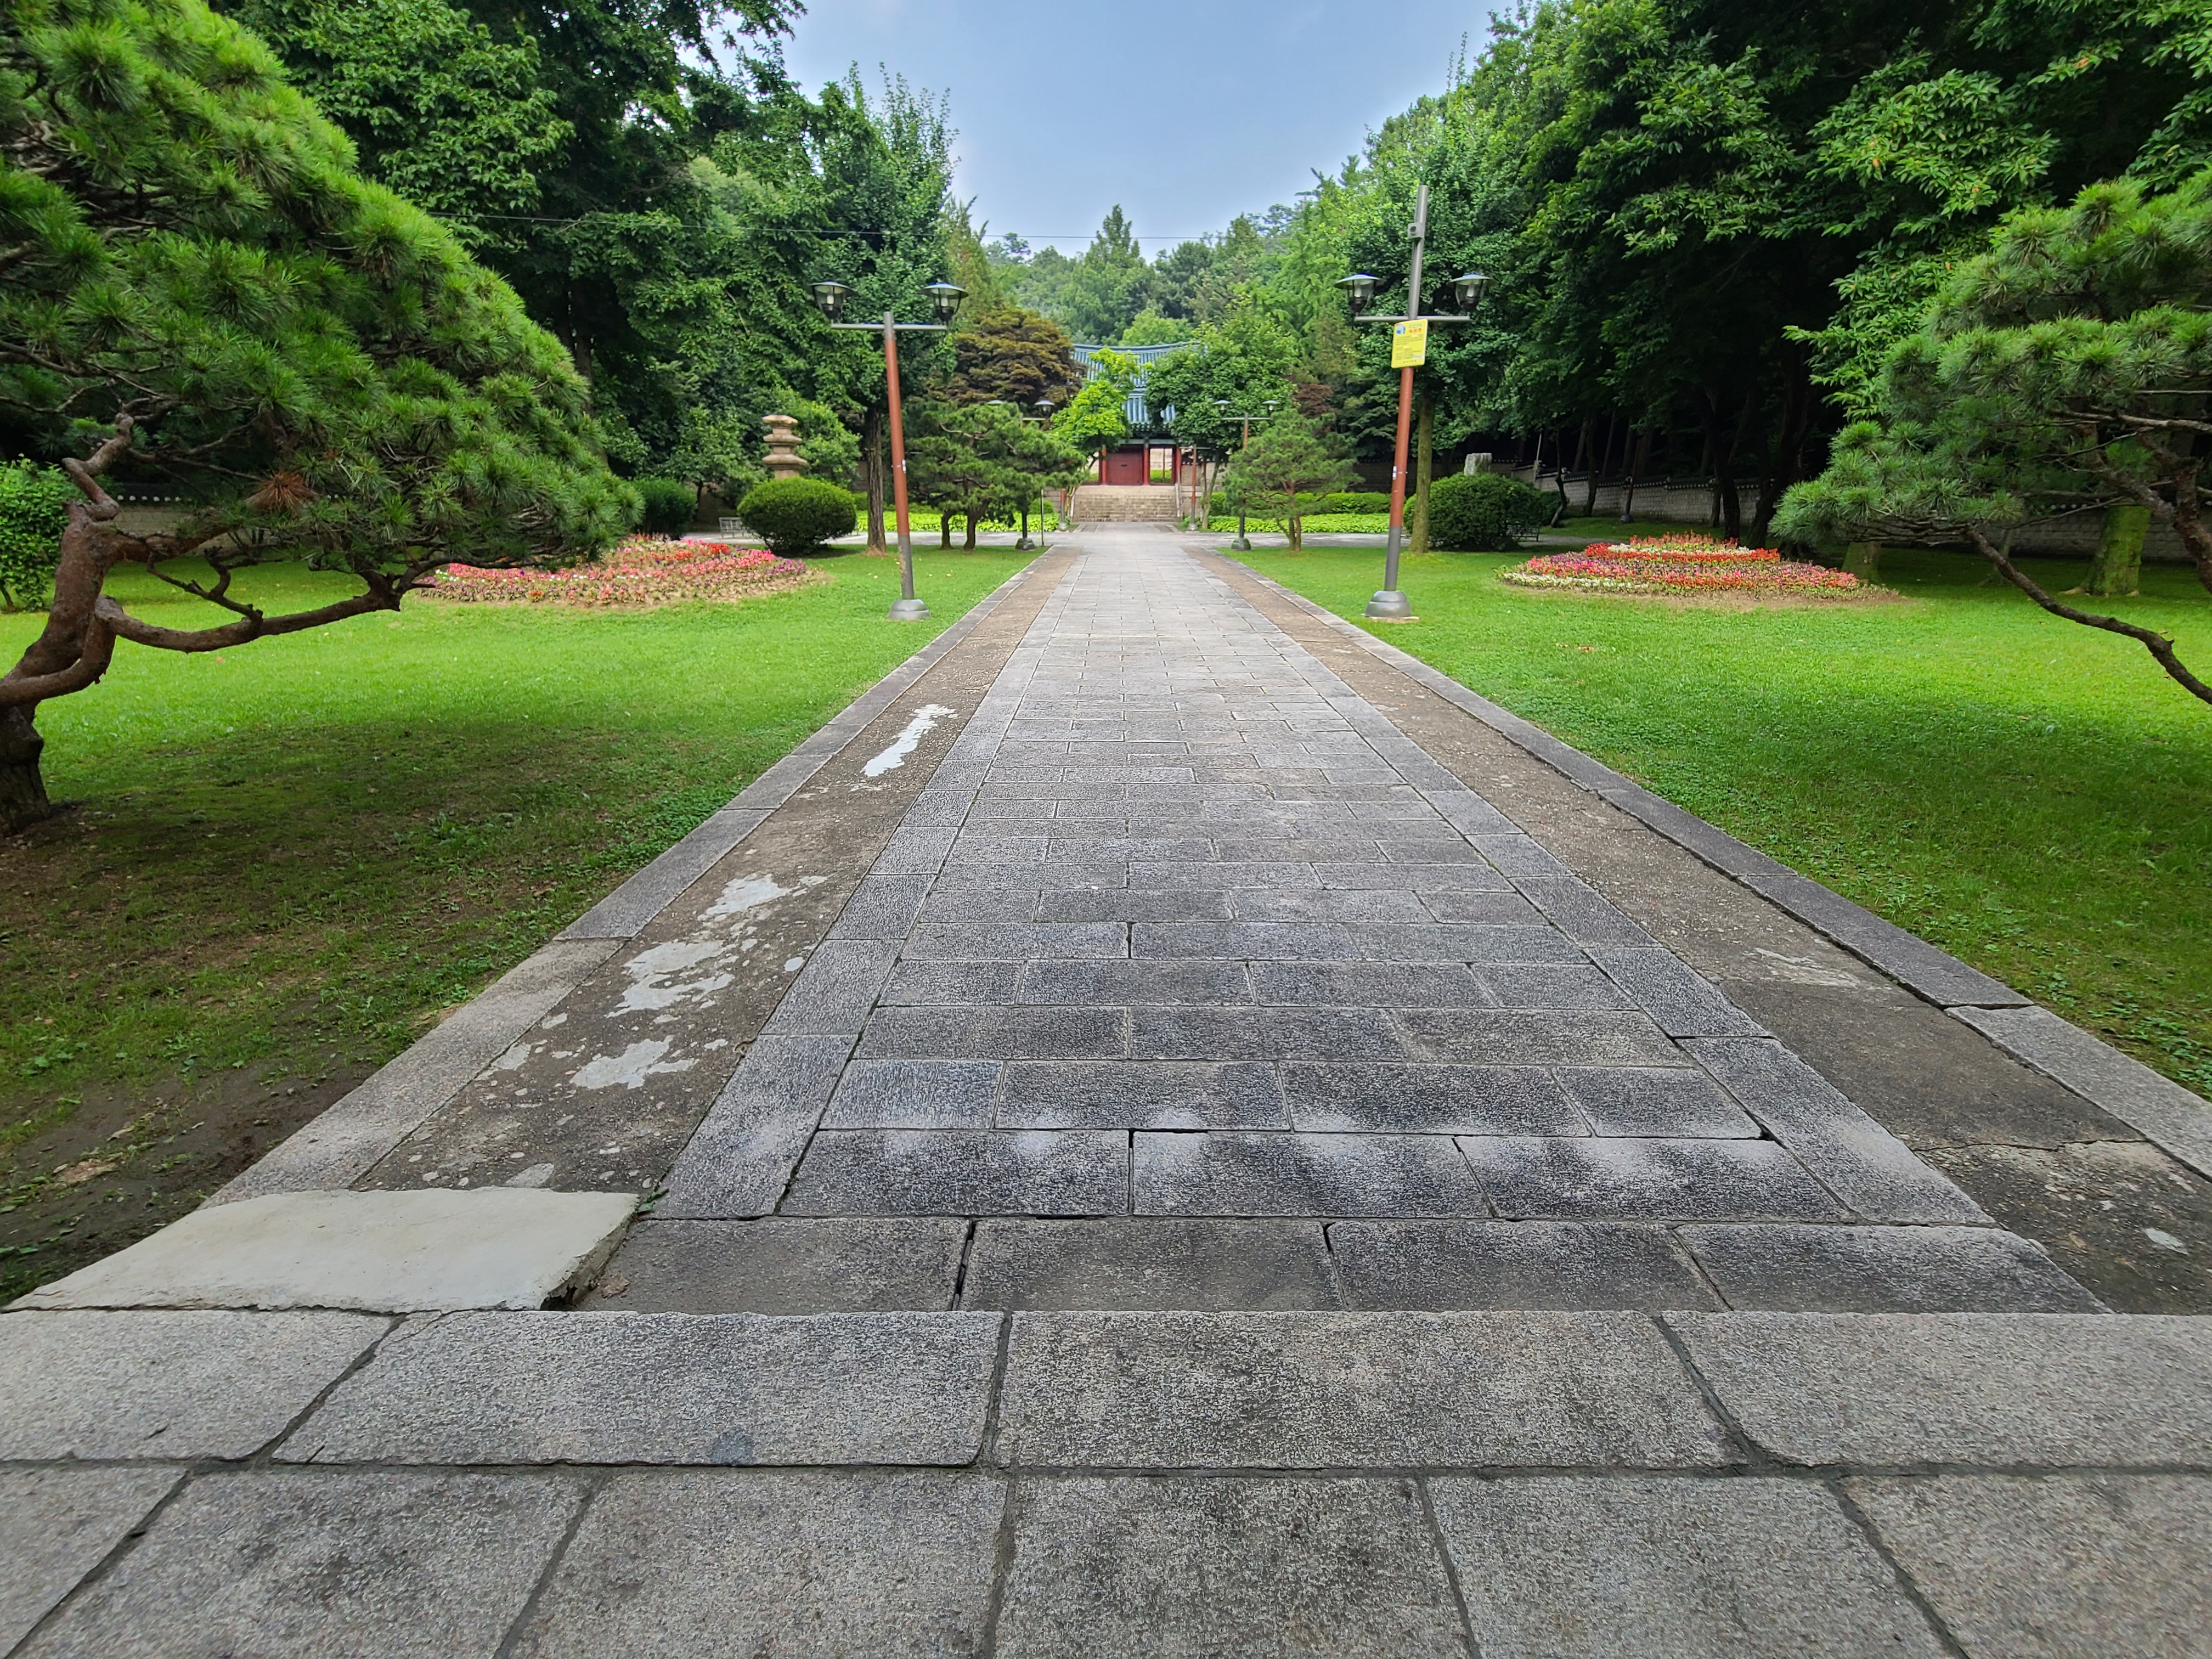 Entryway and Main entrance0 : Entryway to Nakseongdae Park which is spacious and flat